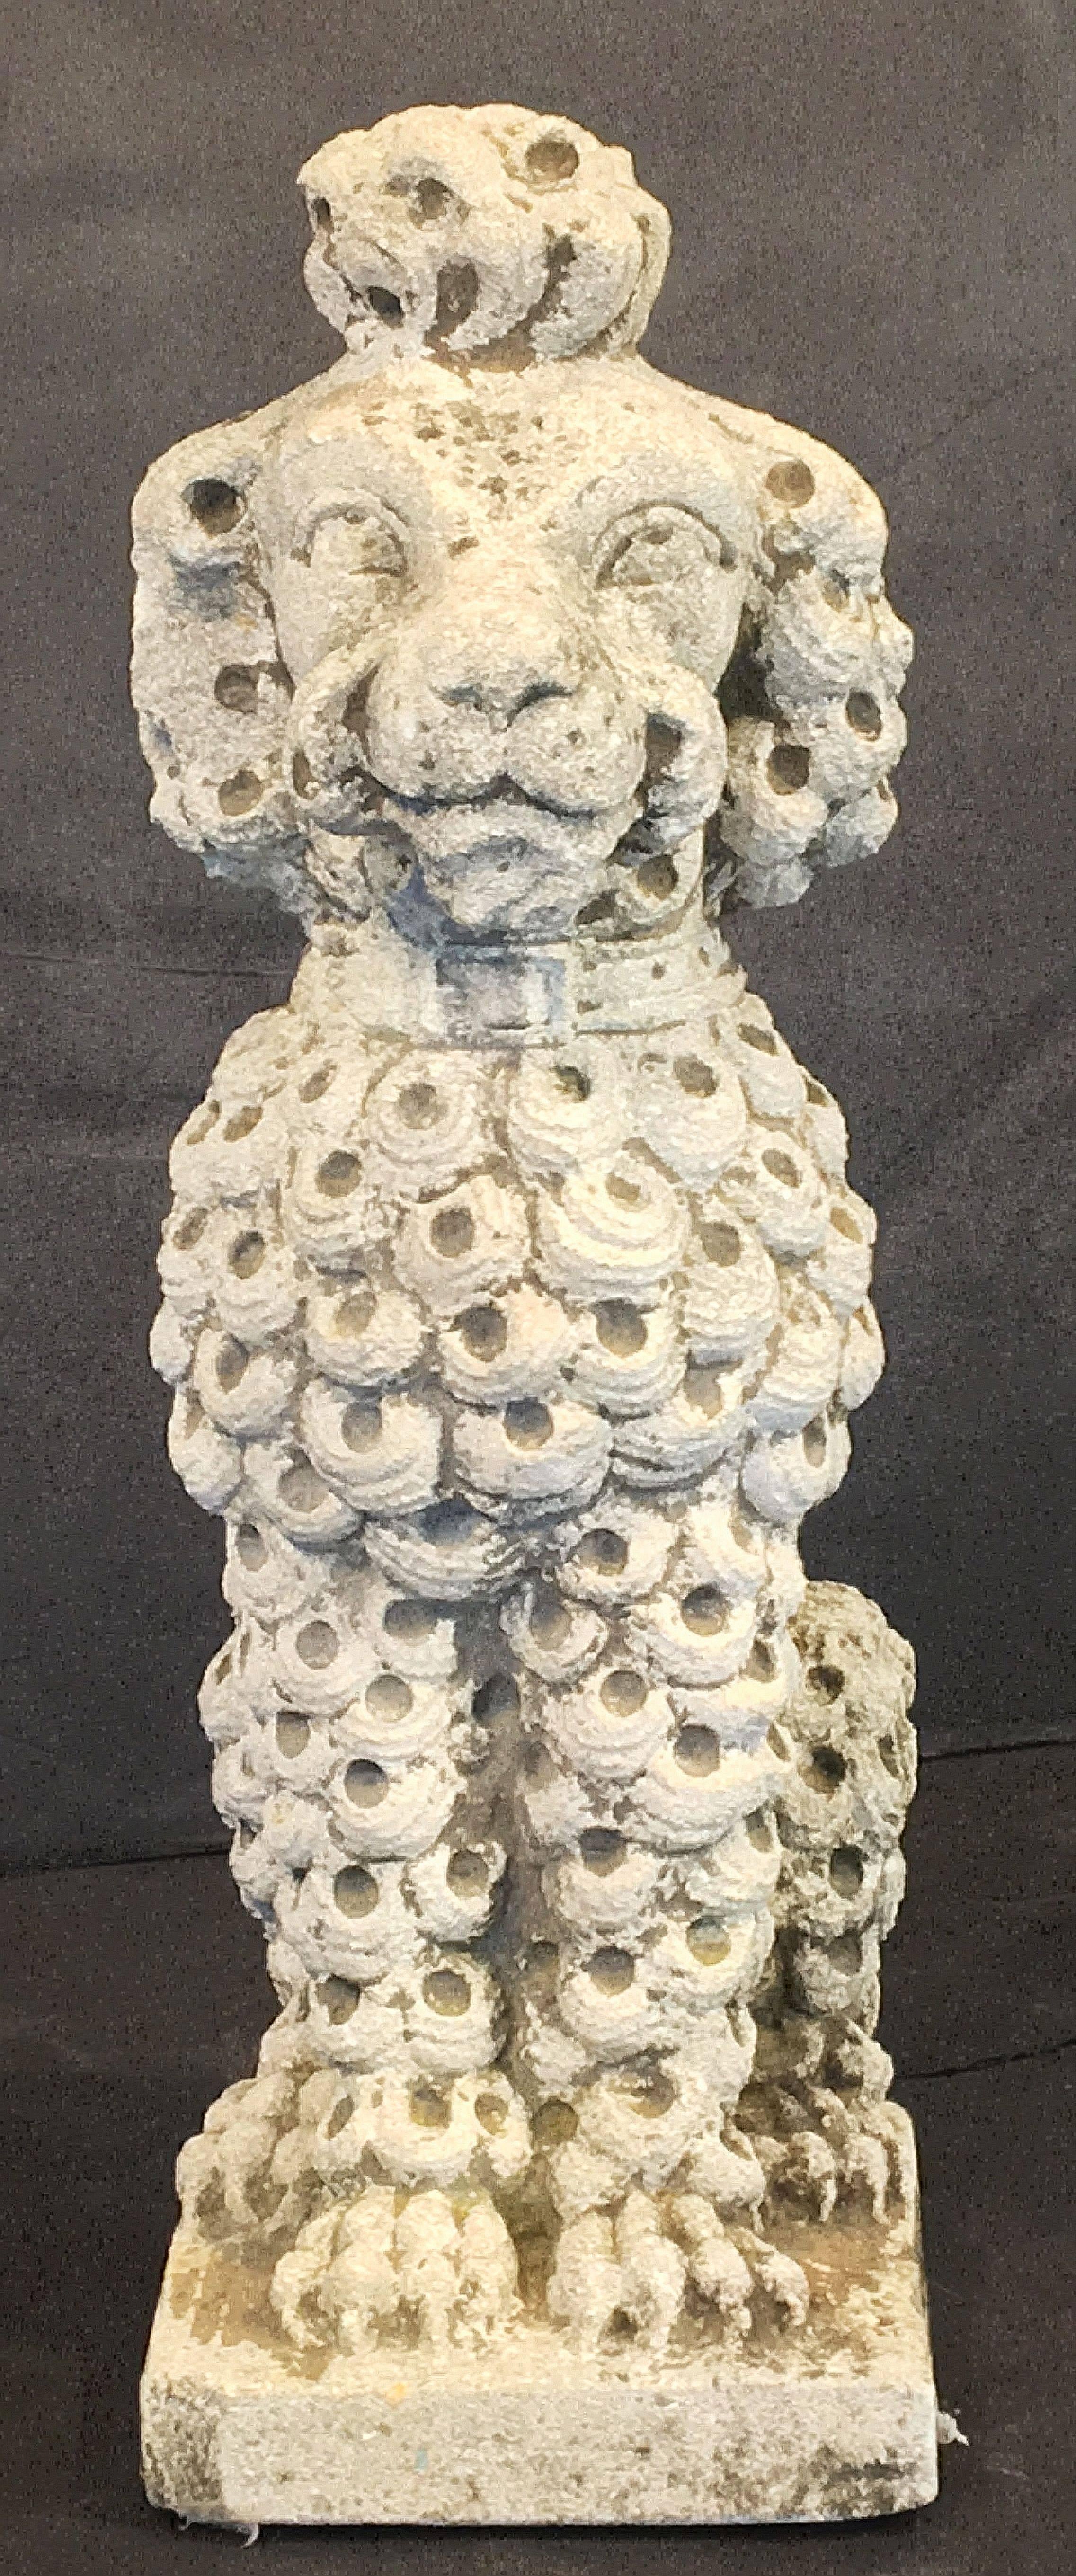 A fine English ornamental garden statuary poodle dog, of composition stone, each featuring finely detailed modeling.

One available - $2895 

Perfect for a garden room or conservatory!